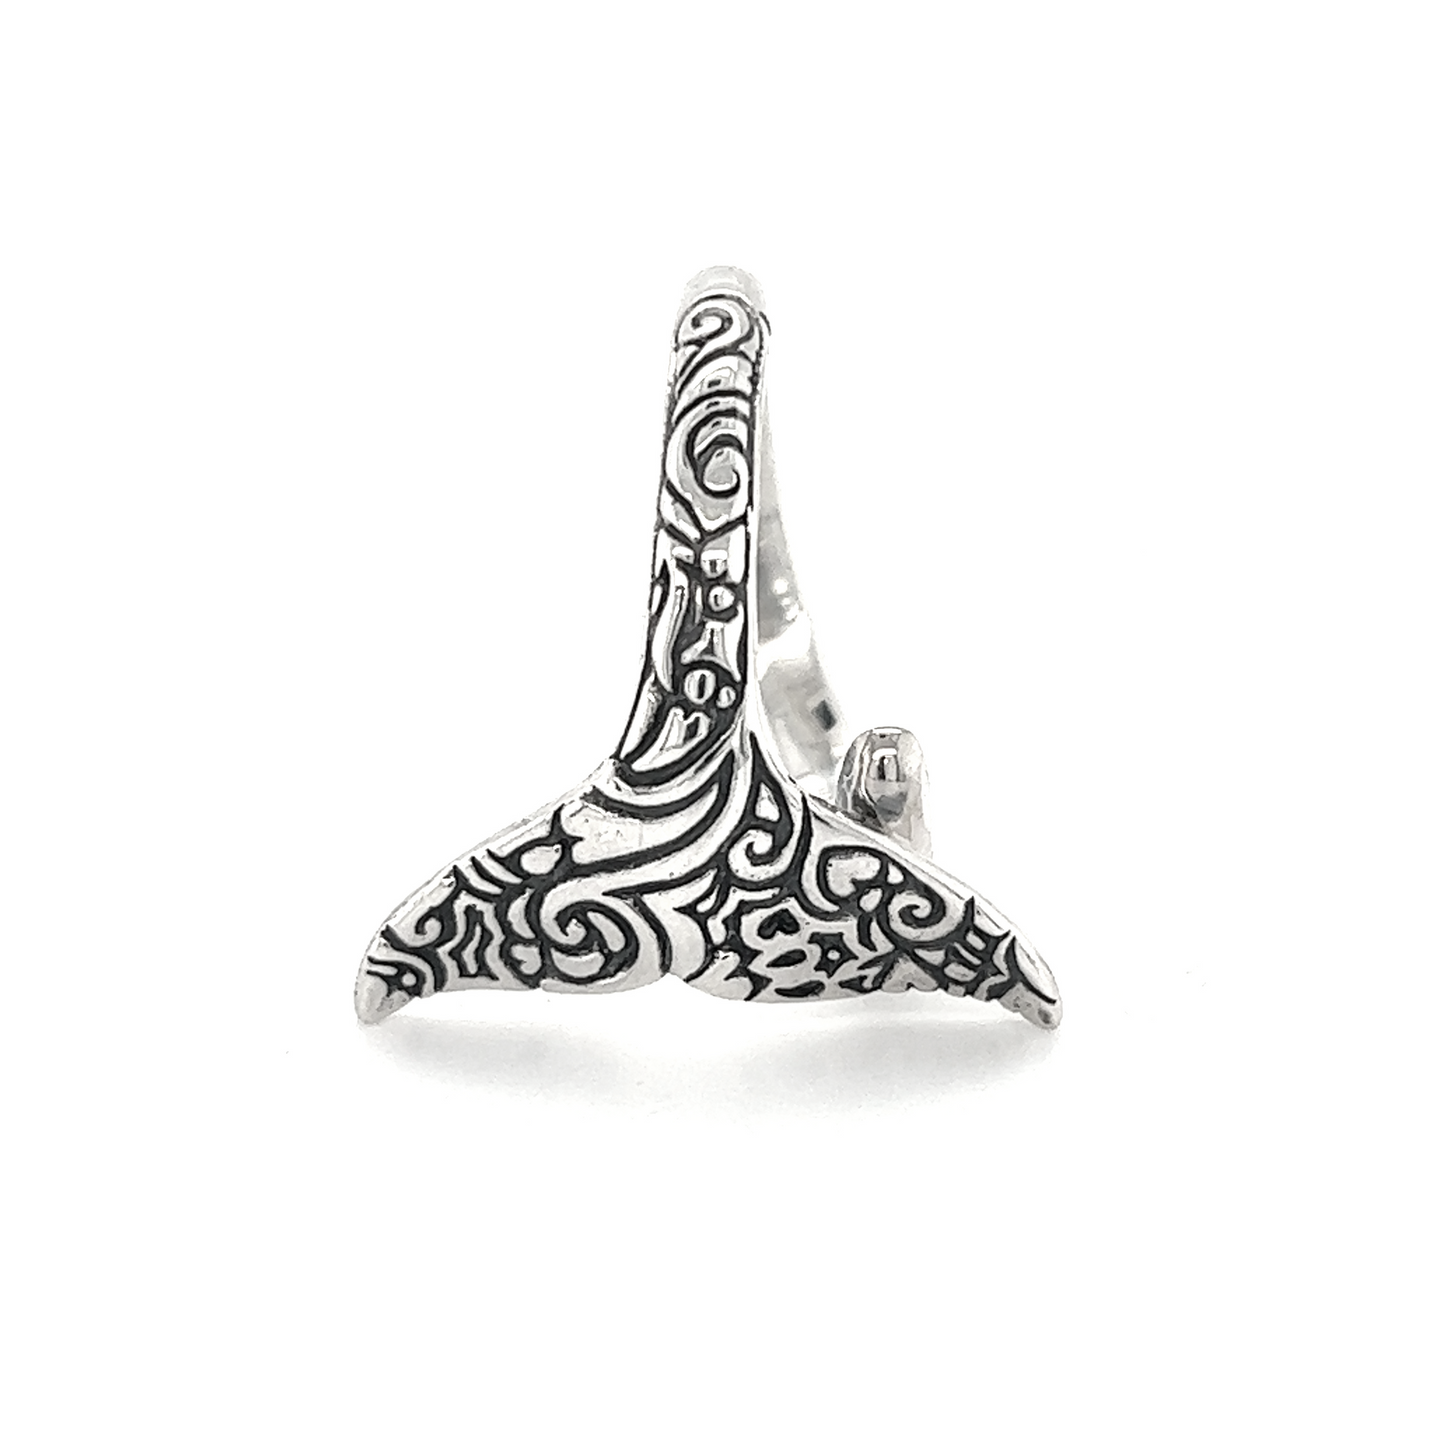 Exceptional Full Filigree Whale Tail Ring in adjustable sterling silver.